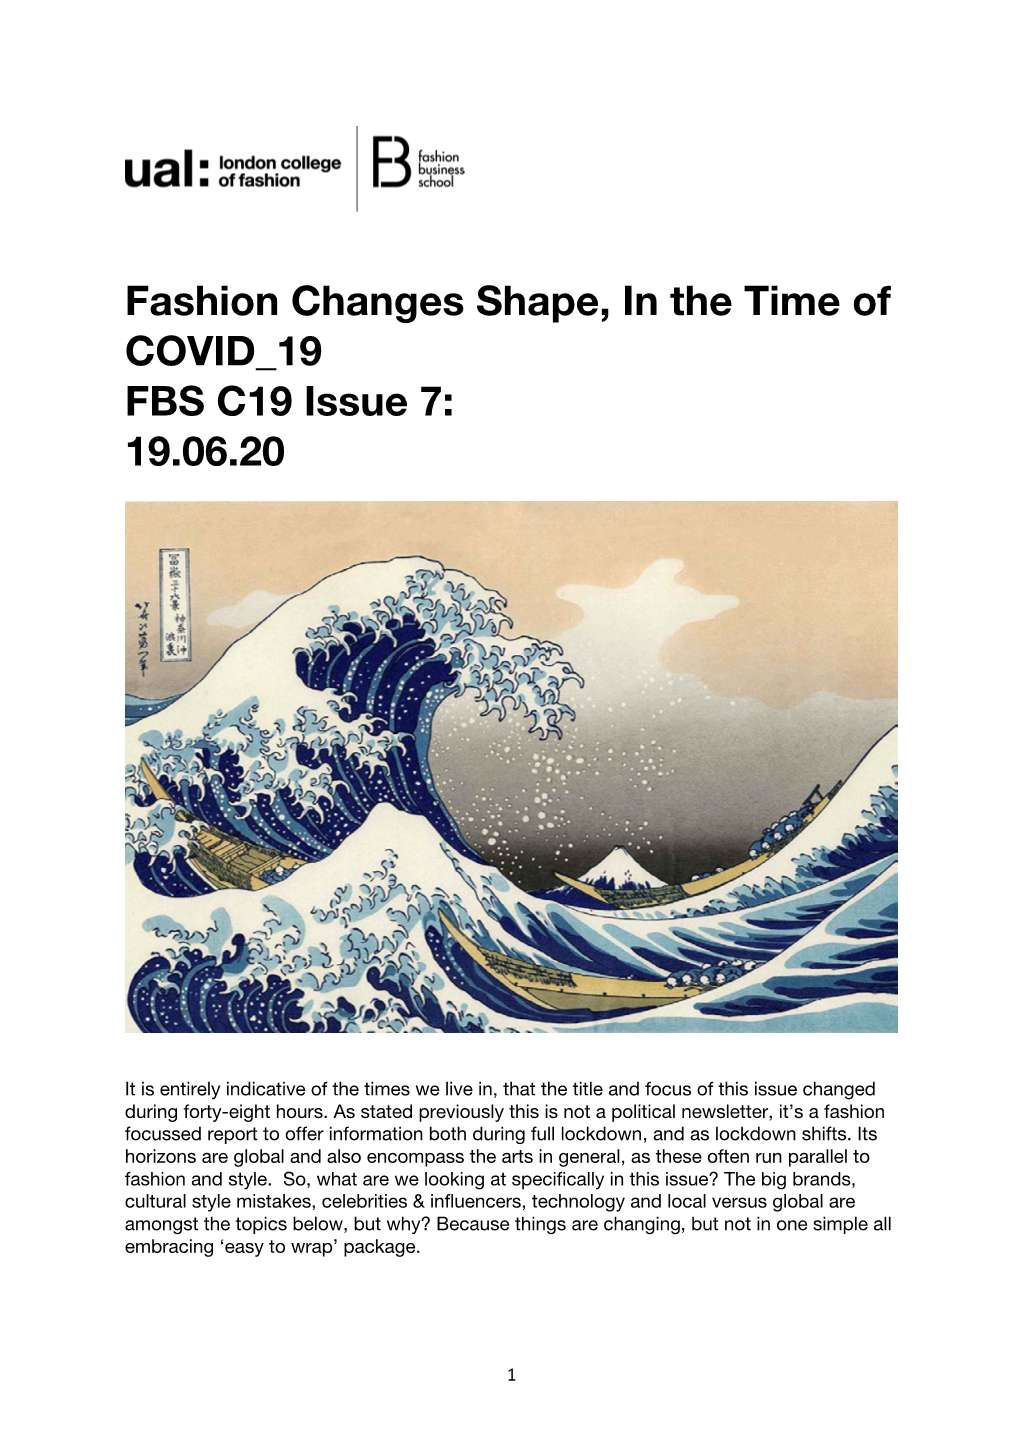 Fashion Changes Shape, in the Time of COVID 19 FBS C19 Issue 7: 19.06.20